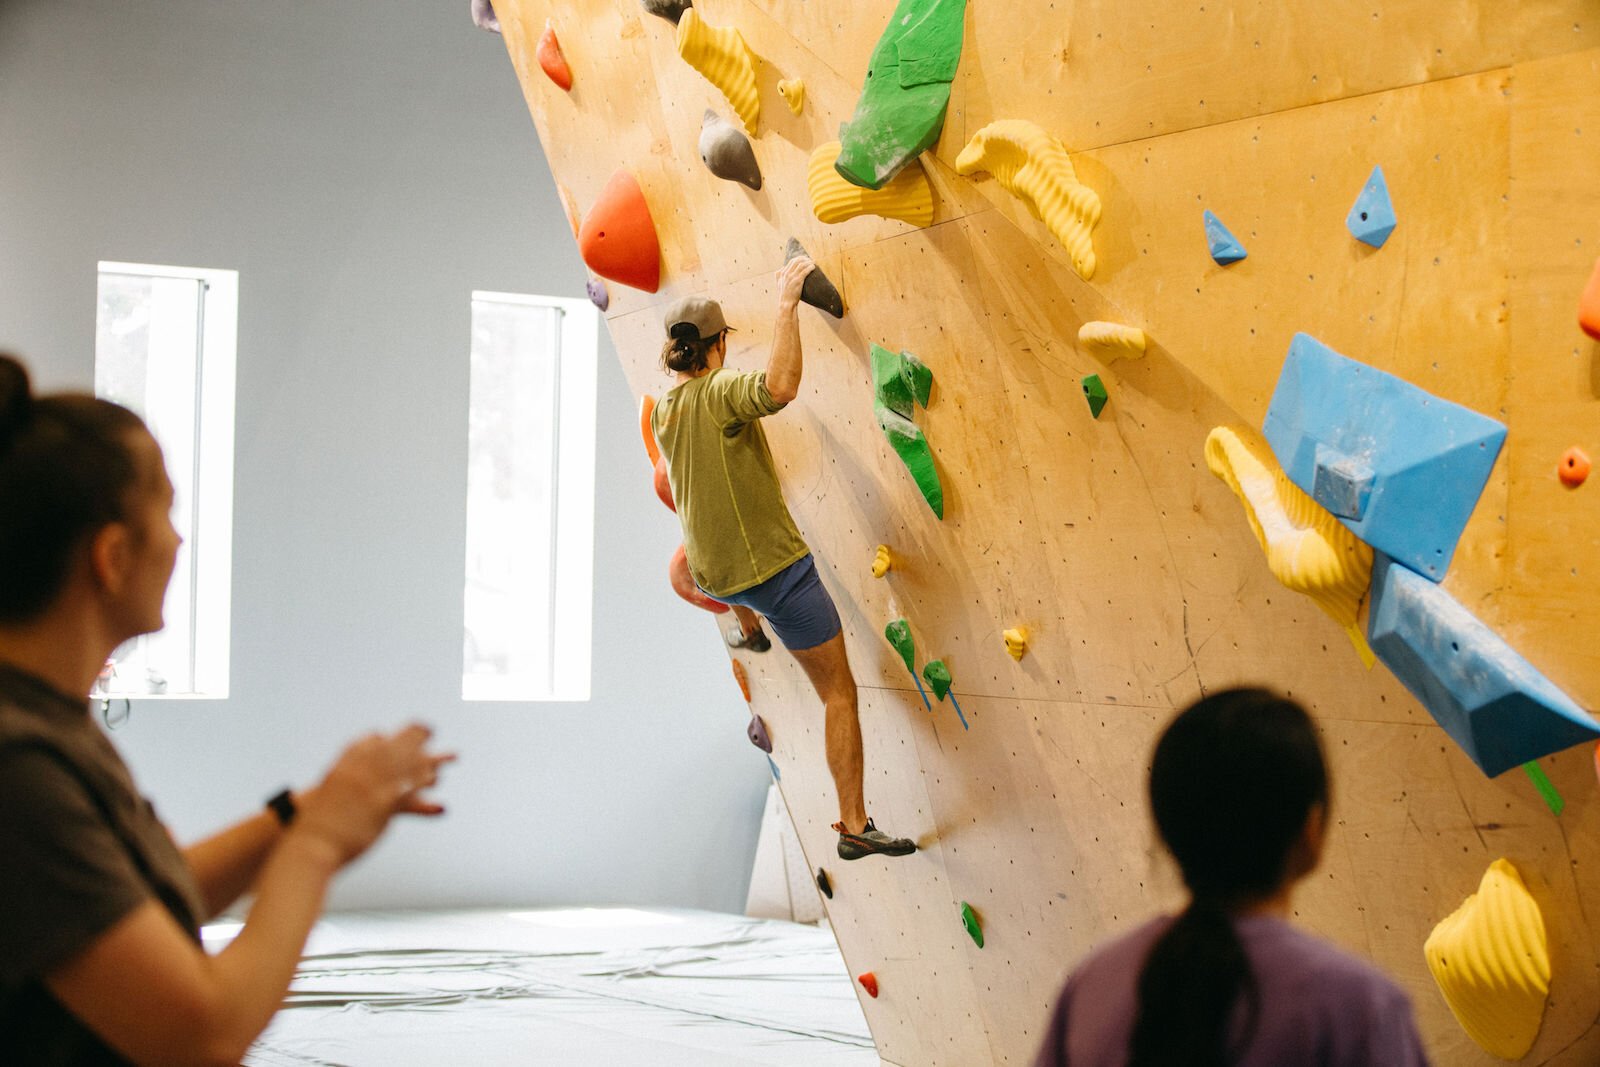 A founding member attempts a route at the soft opening of Summit City Climbing Co.